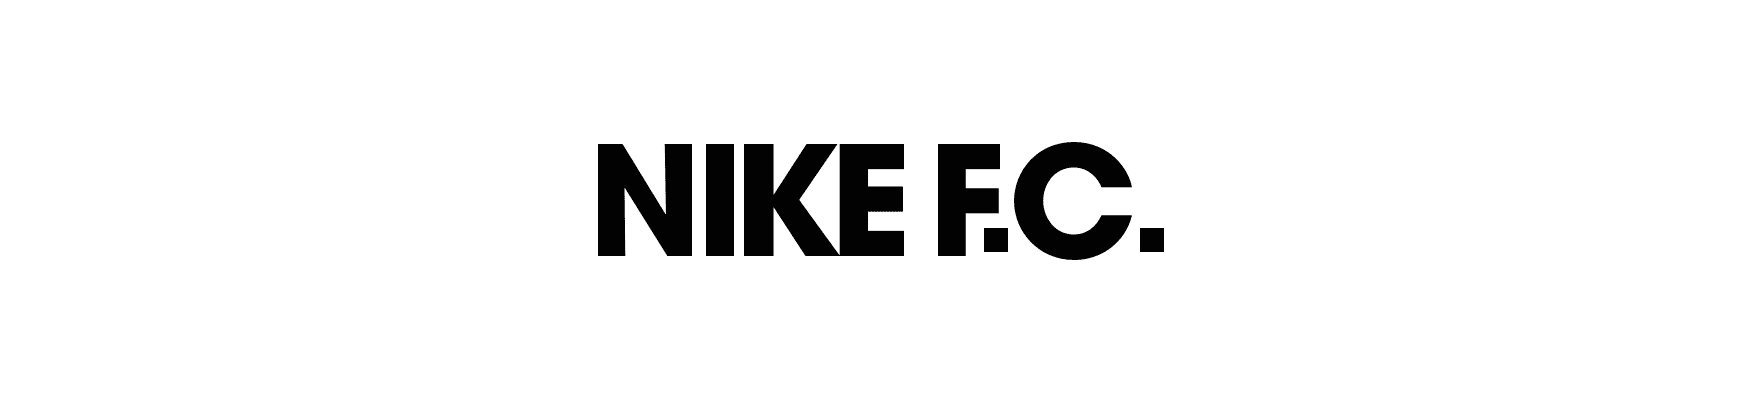 Nike F.C. Collection.